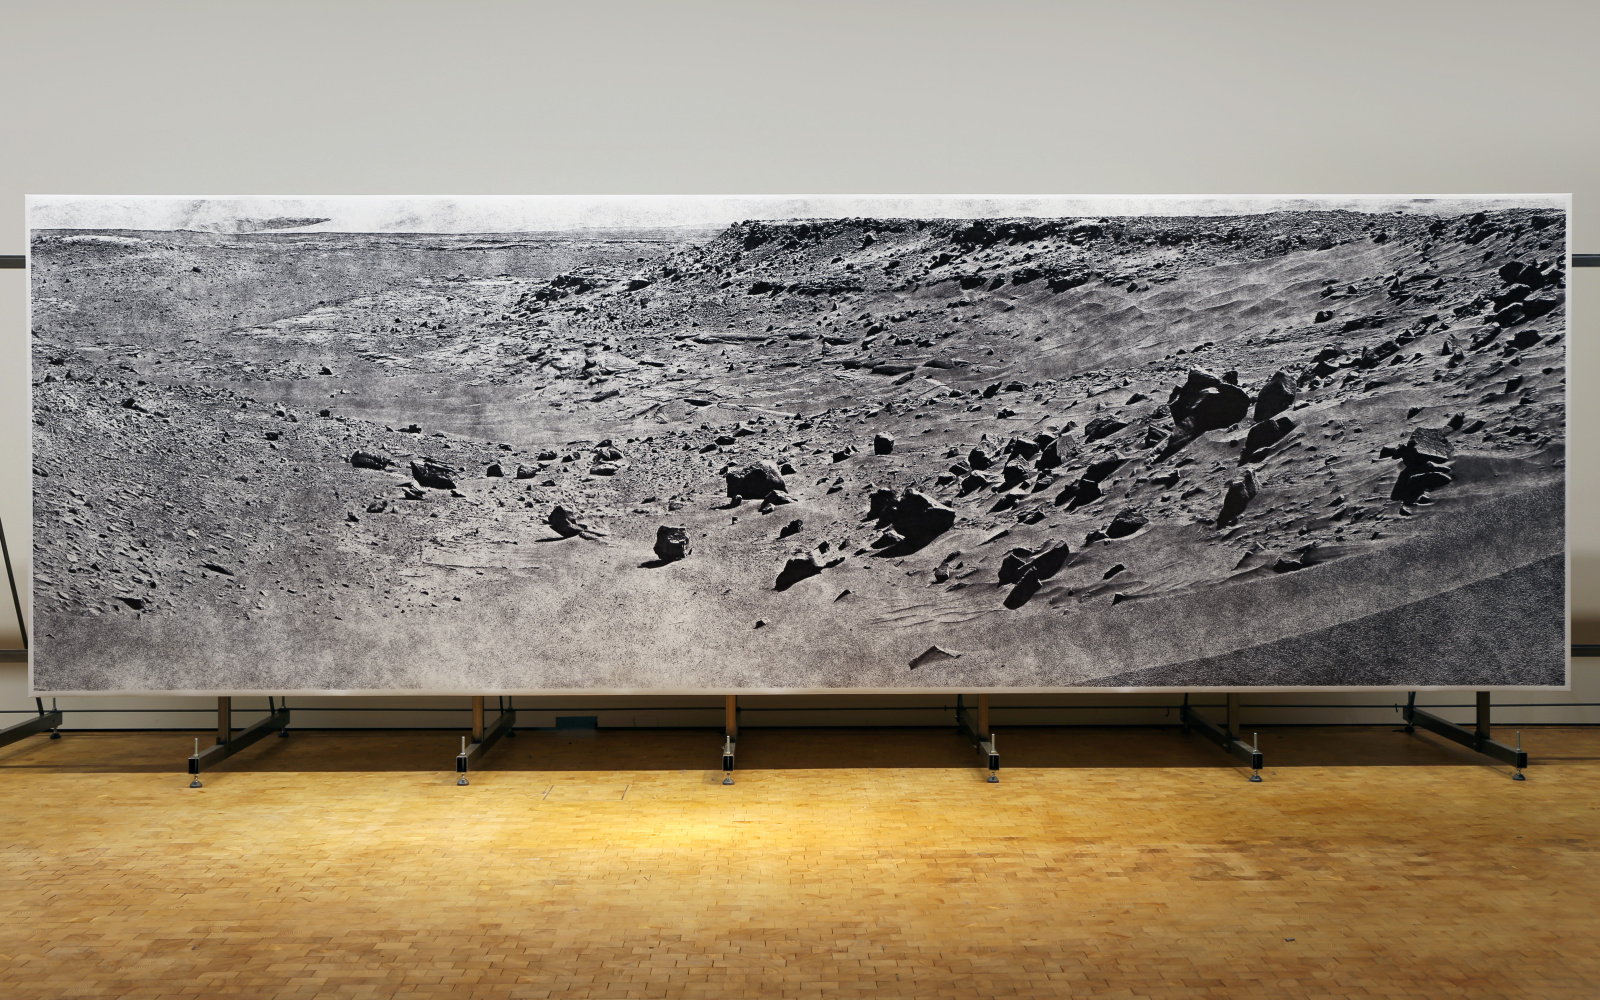 Big picture of a moonscape